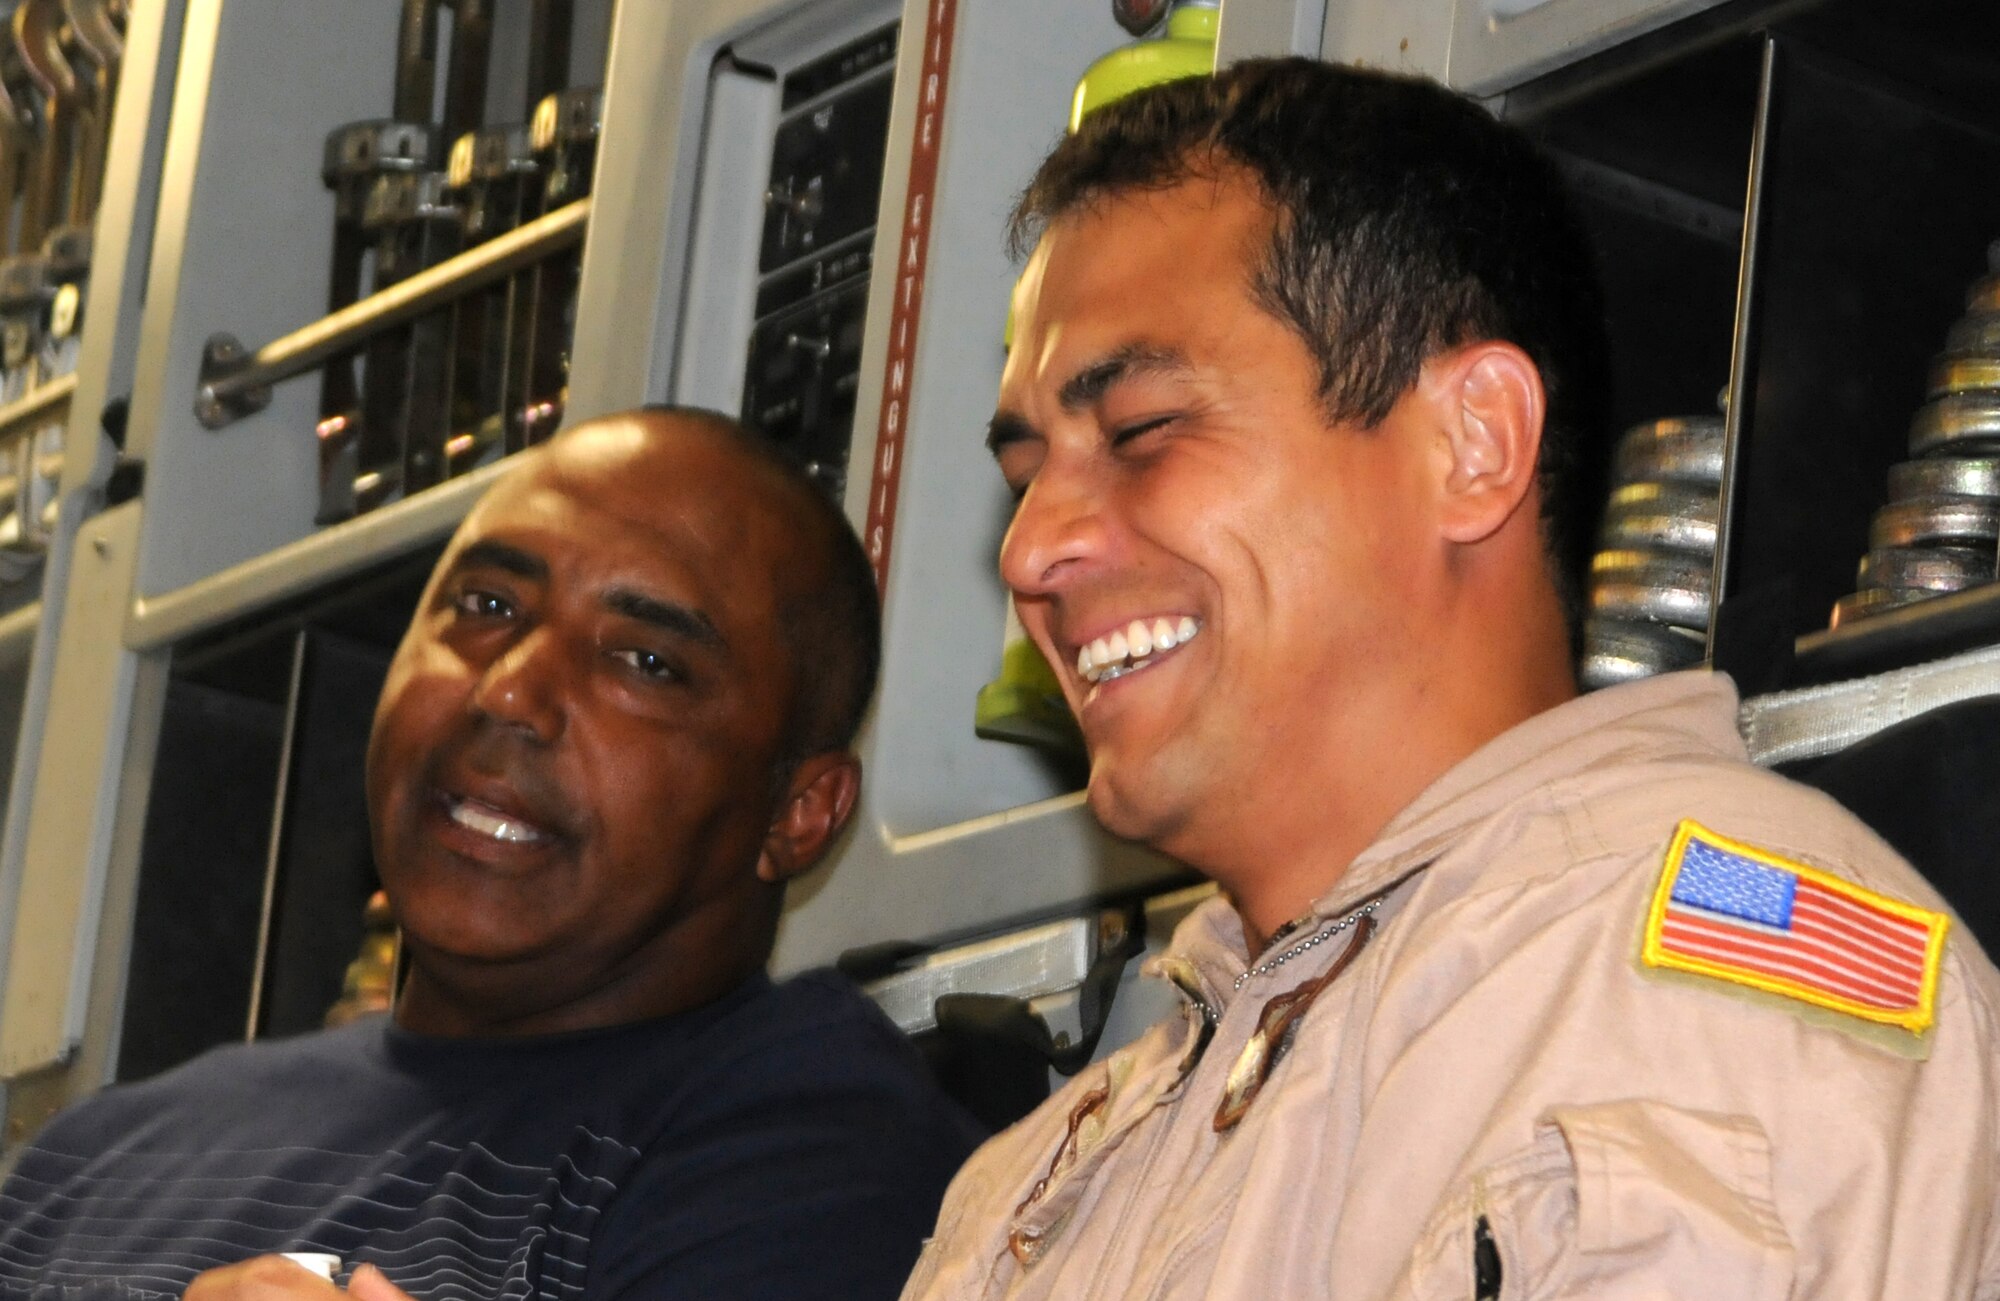 Coach Marvin Lewis, Cincinnati  Bengals head coach, shares a laugh with Tech. Sgt. Harry Pollock, 326th Airlift Squadron, Dover Air Force Base, Del., loadmaster, in the cargo area of a C-17 Globemaster III June 29. The aircrew picked up the four National Football League coaches who were participating in the 2010 NFL-USO Coaches' tour at Ramstein Air Base, Germany. The crew was slated to transport the coaches to Bagram Air Base, Afghanistan. (U.S. Air Force photo/Senior Airman Andria J. Allmond)
